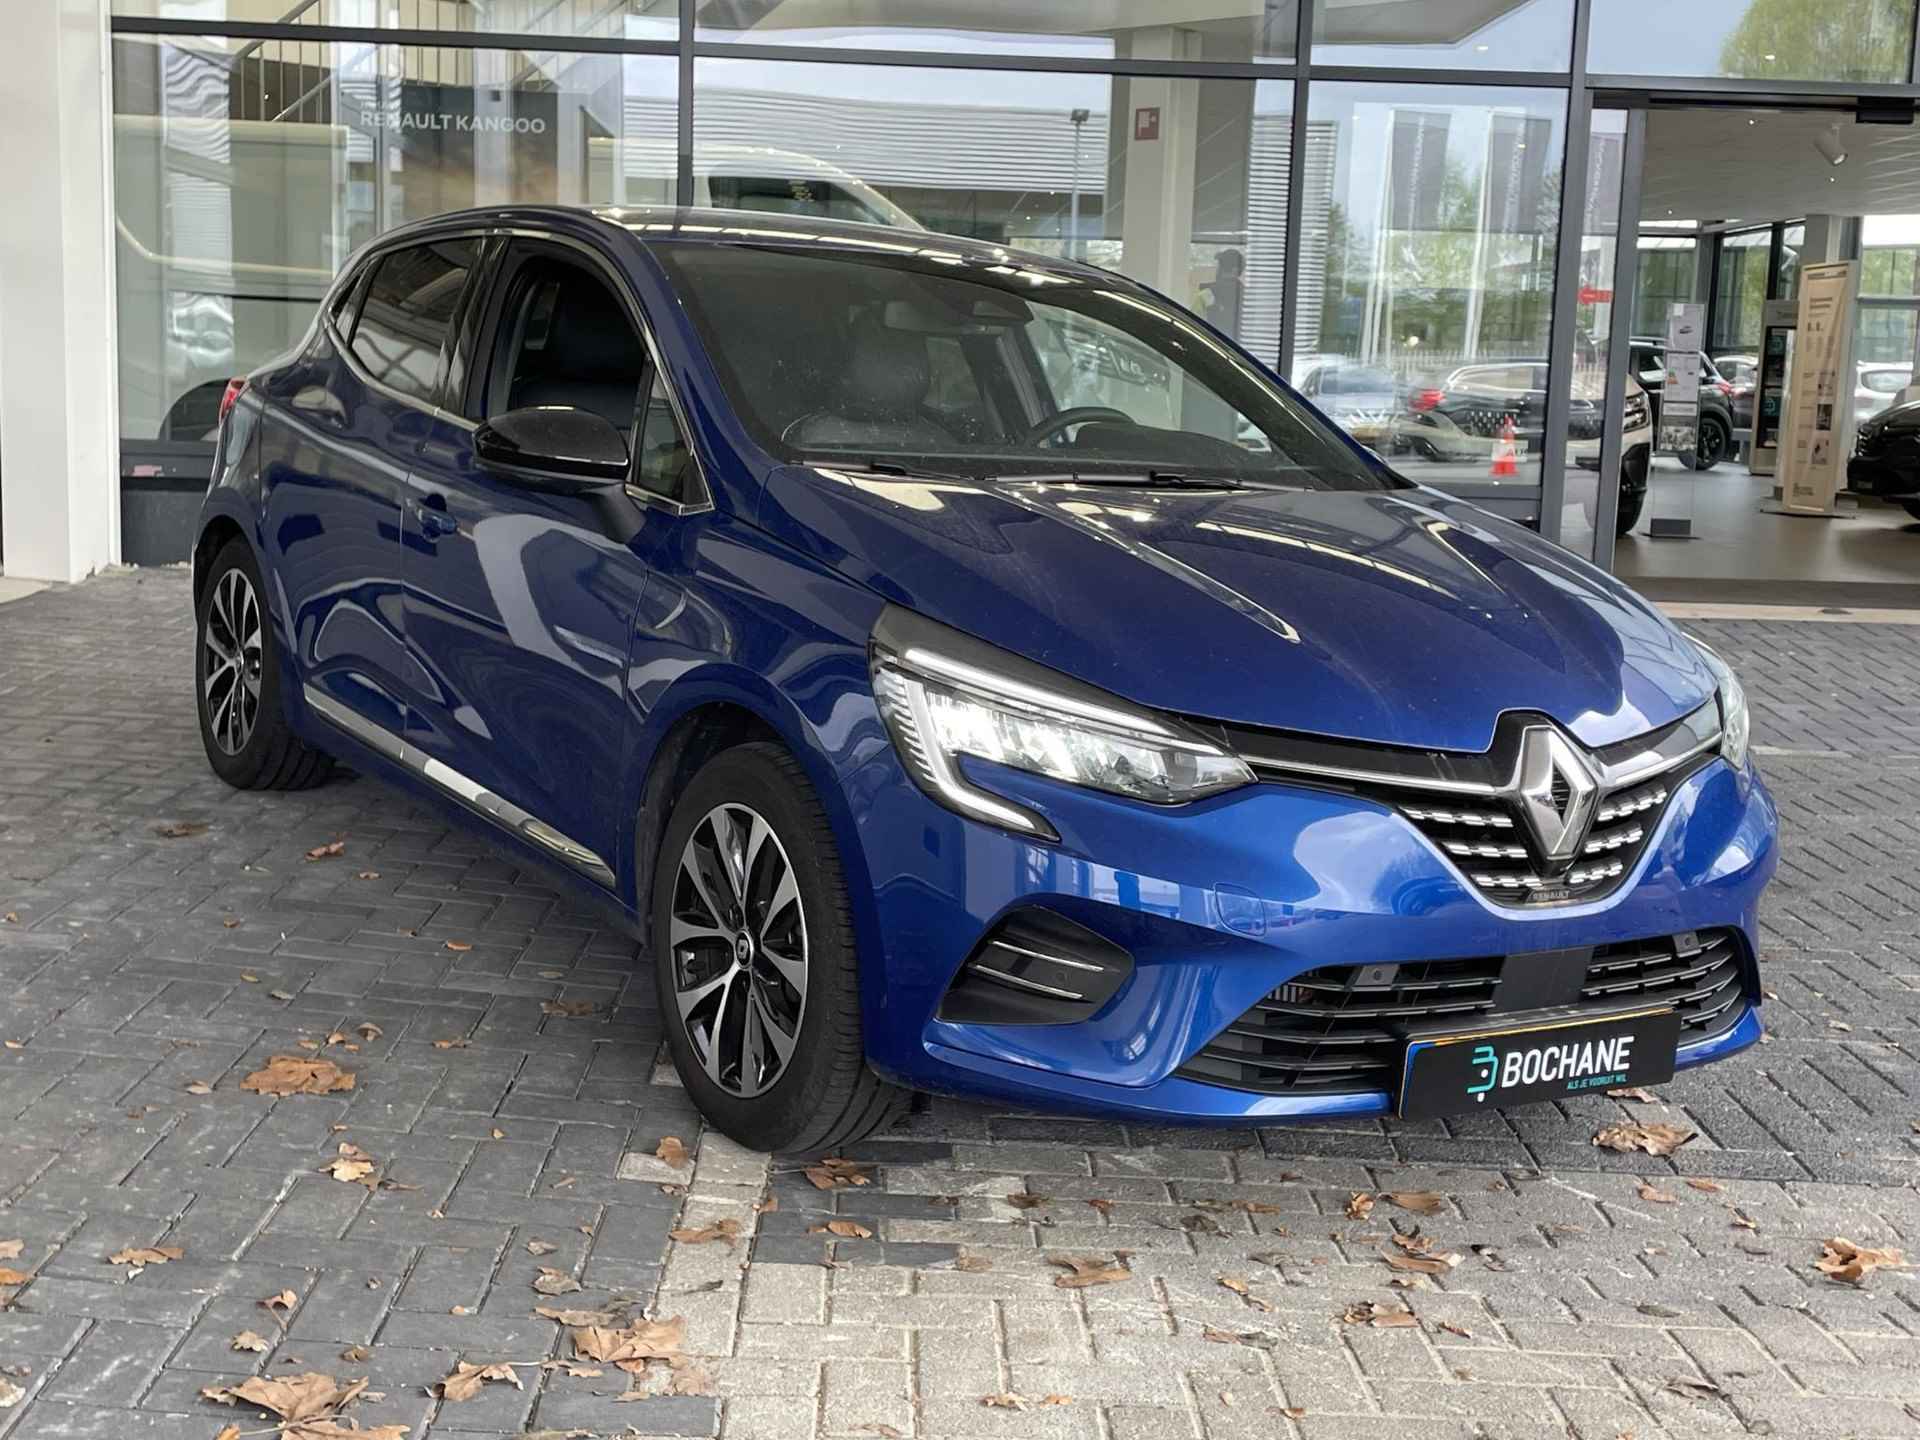 Renault Clio 1.0 TCe 90 Techno  / Cruise / Clima / Full LED / Navigatie / Camera / PDC  / Apple Carplay of Android Auto - 6/27